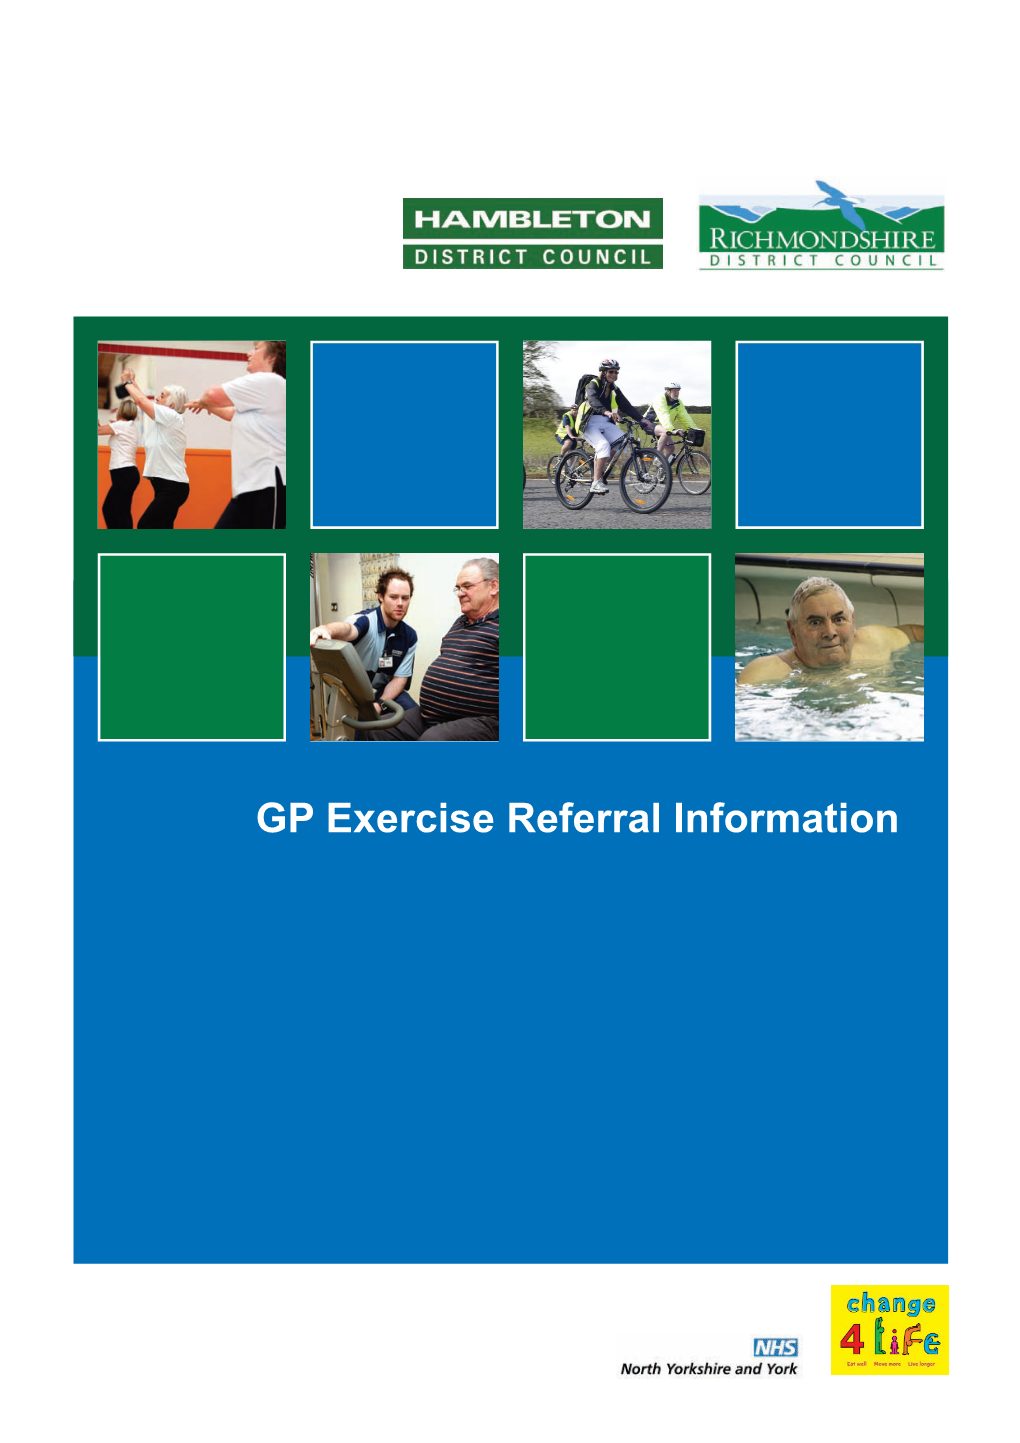 GP Exercise Referral Information Contents